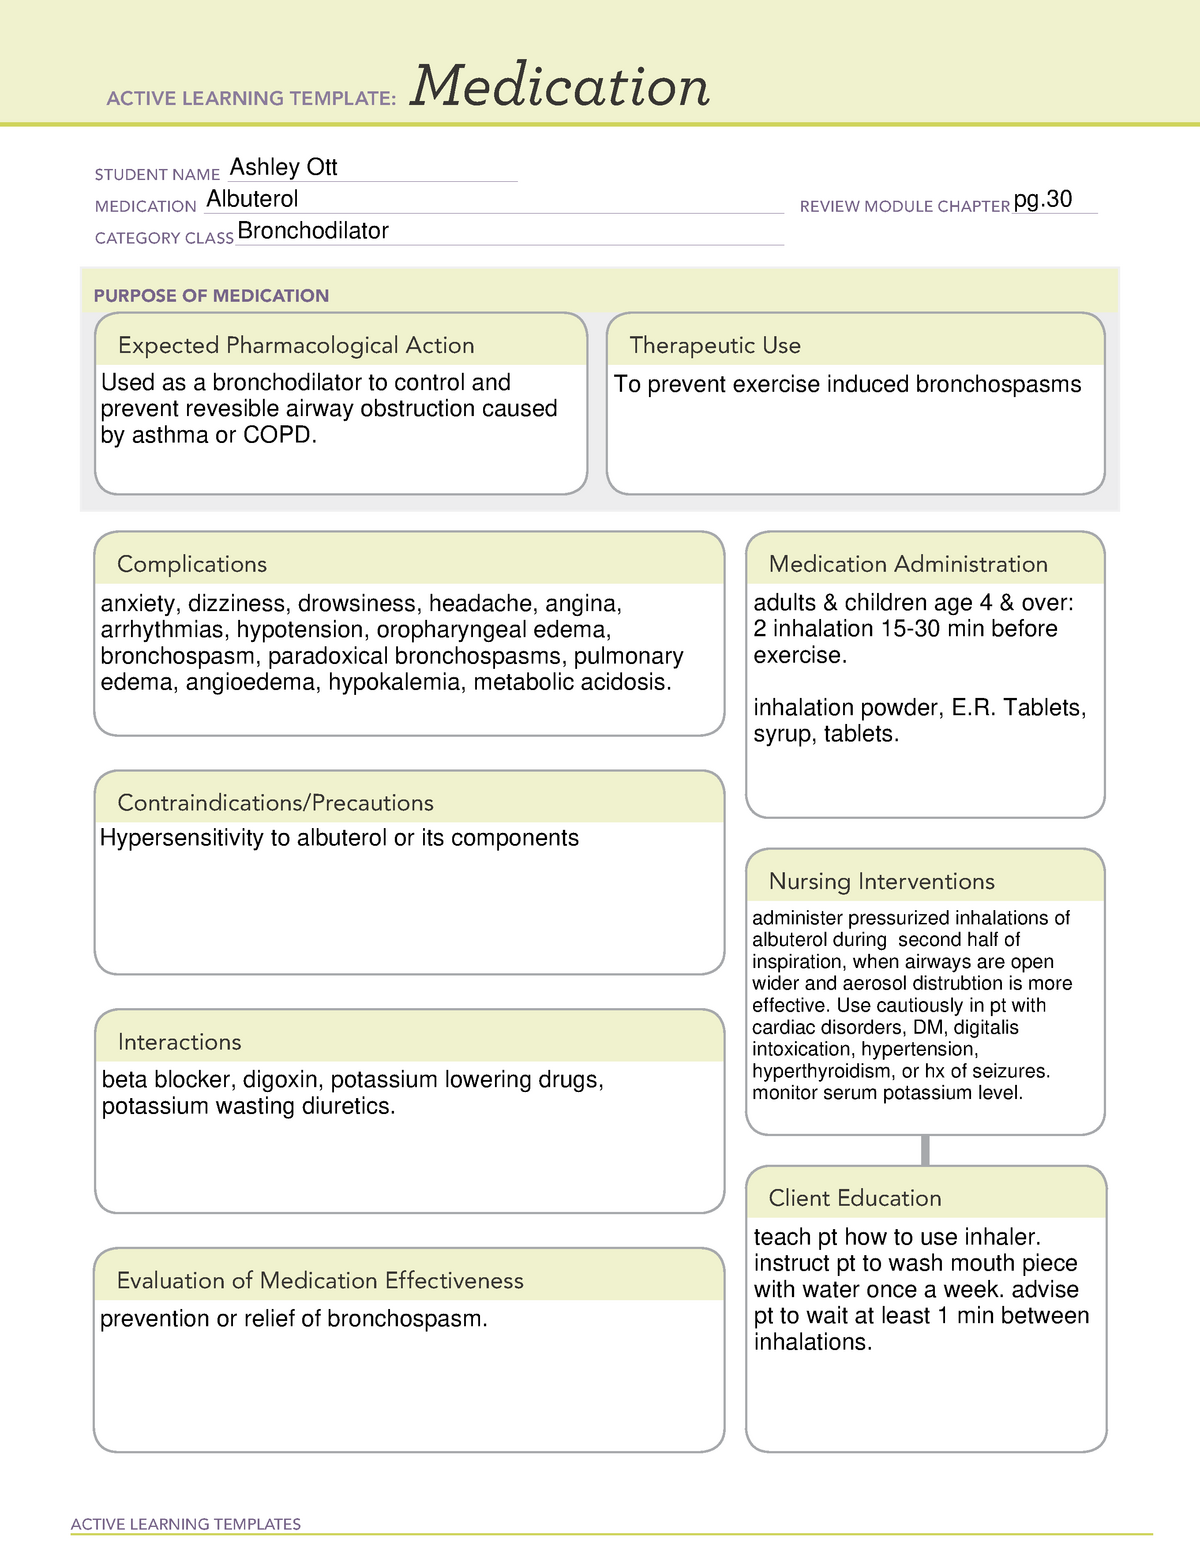 Albuterol med card ACTIVE LEARNING TEMPLATES Medication STUDENT NAME